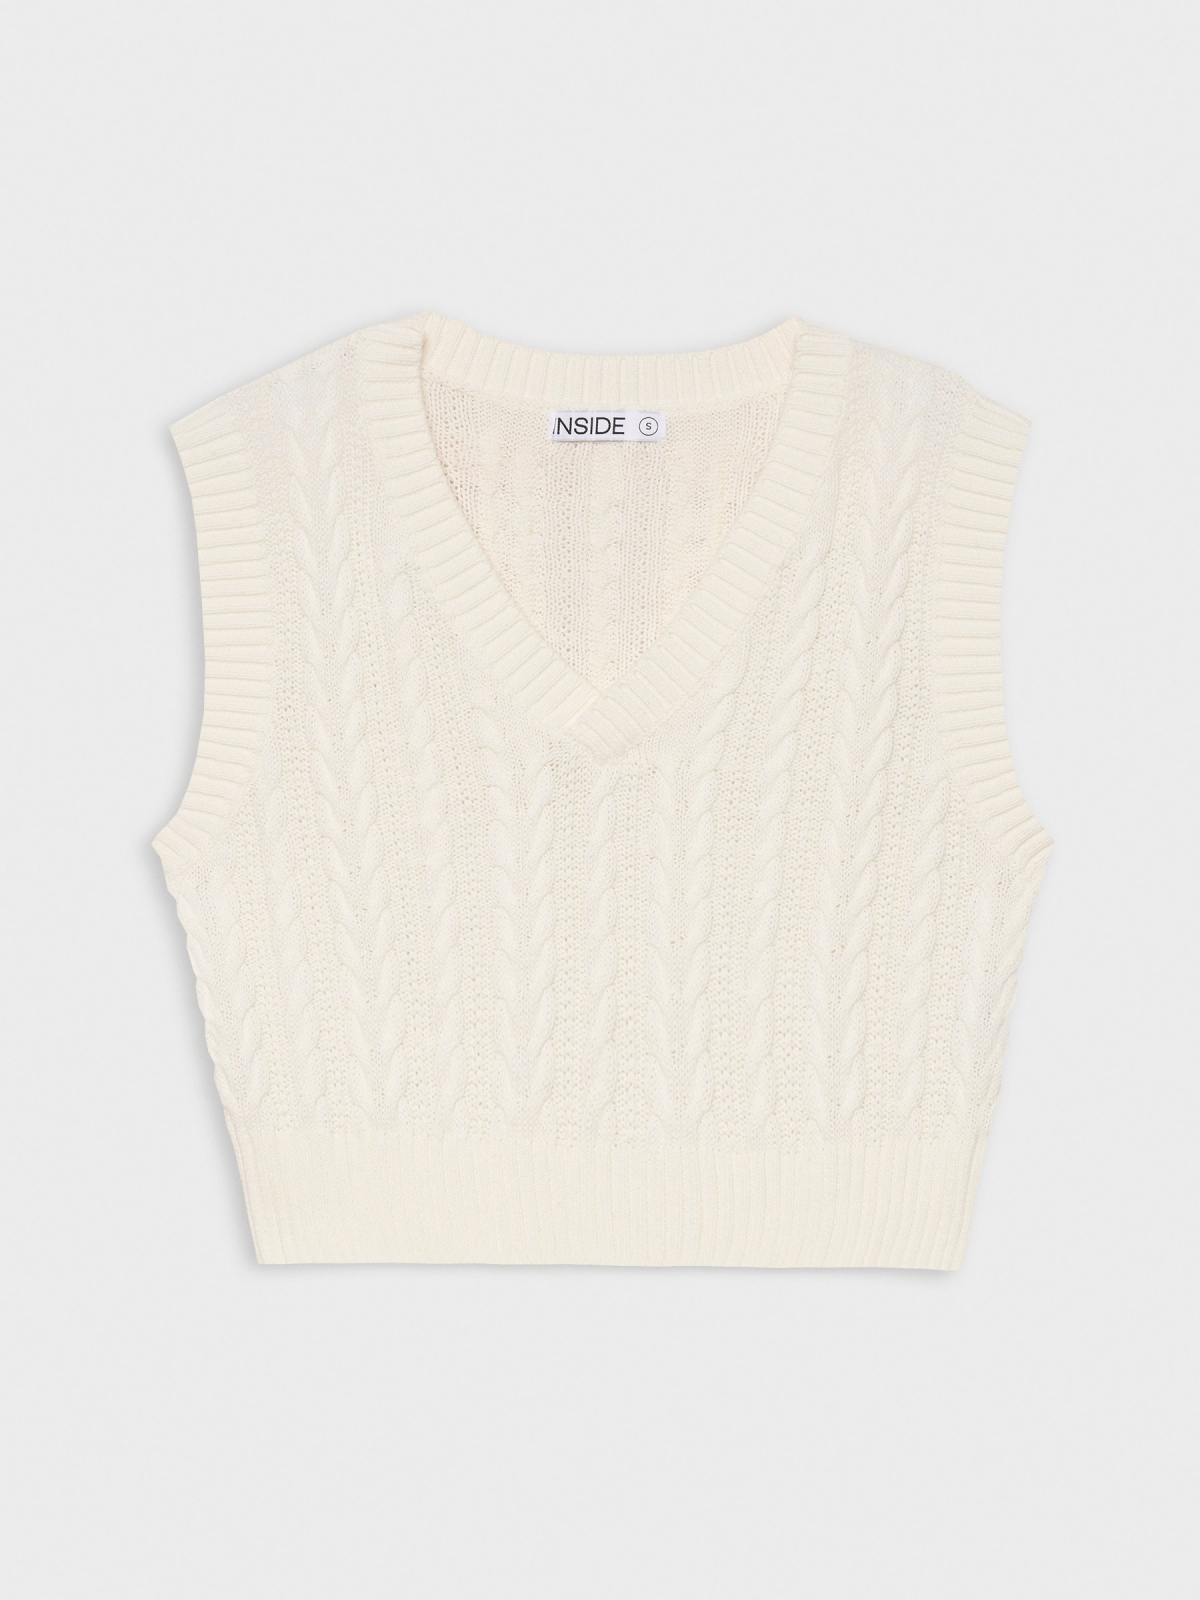  Vest of eights off white